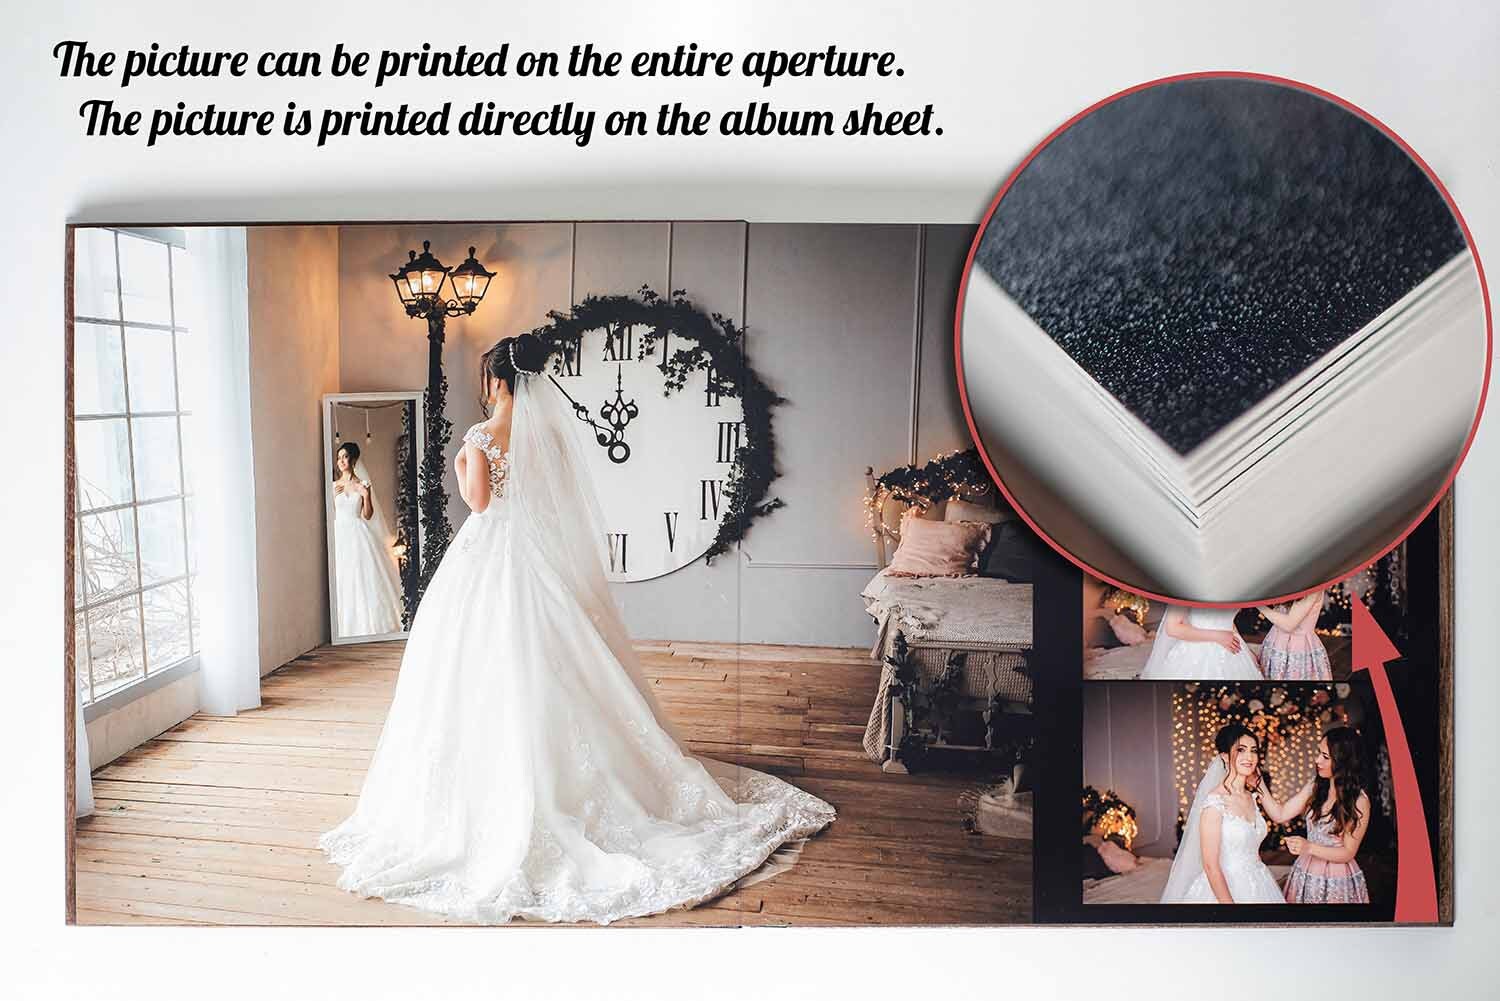 Deluxe Wedding Photo Album With Personalized Cover 30x30 Cm, 21x21